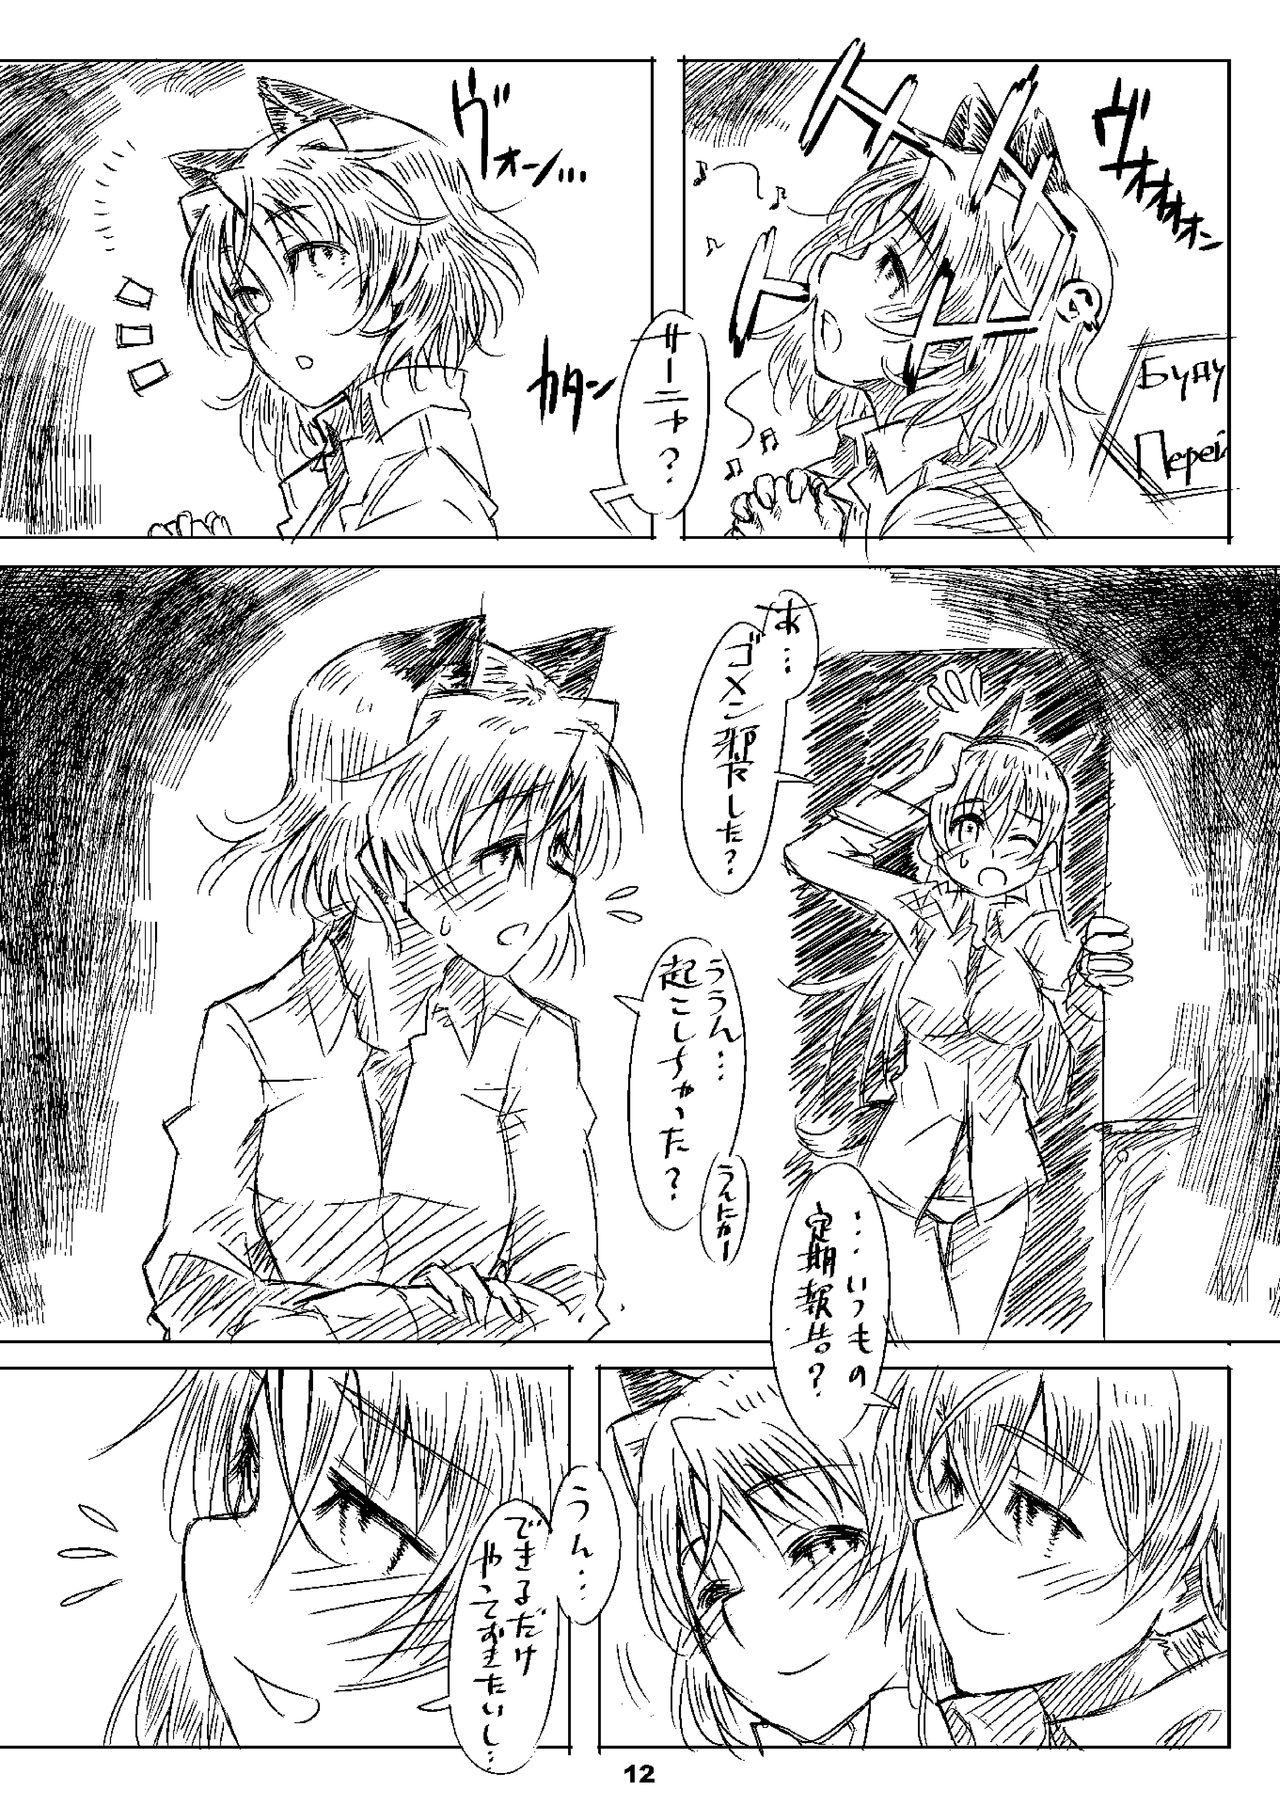 Groupfuck Starlight Milky Way 4 - Strike witches Grosso - Page 11